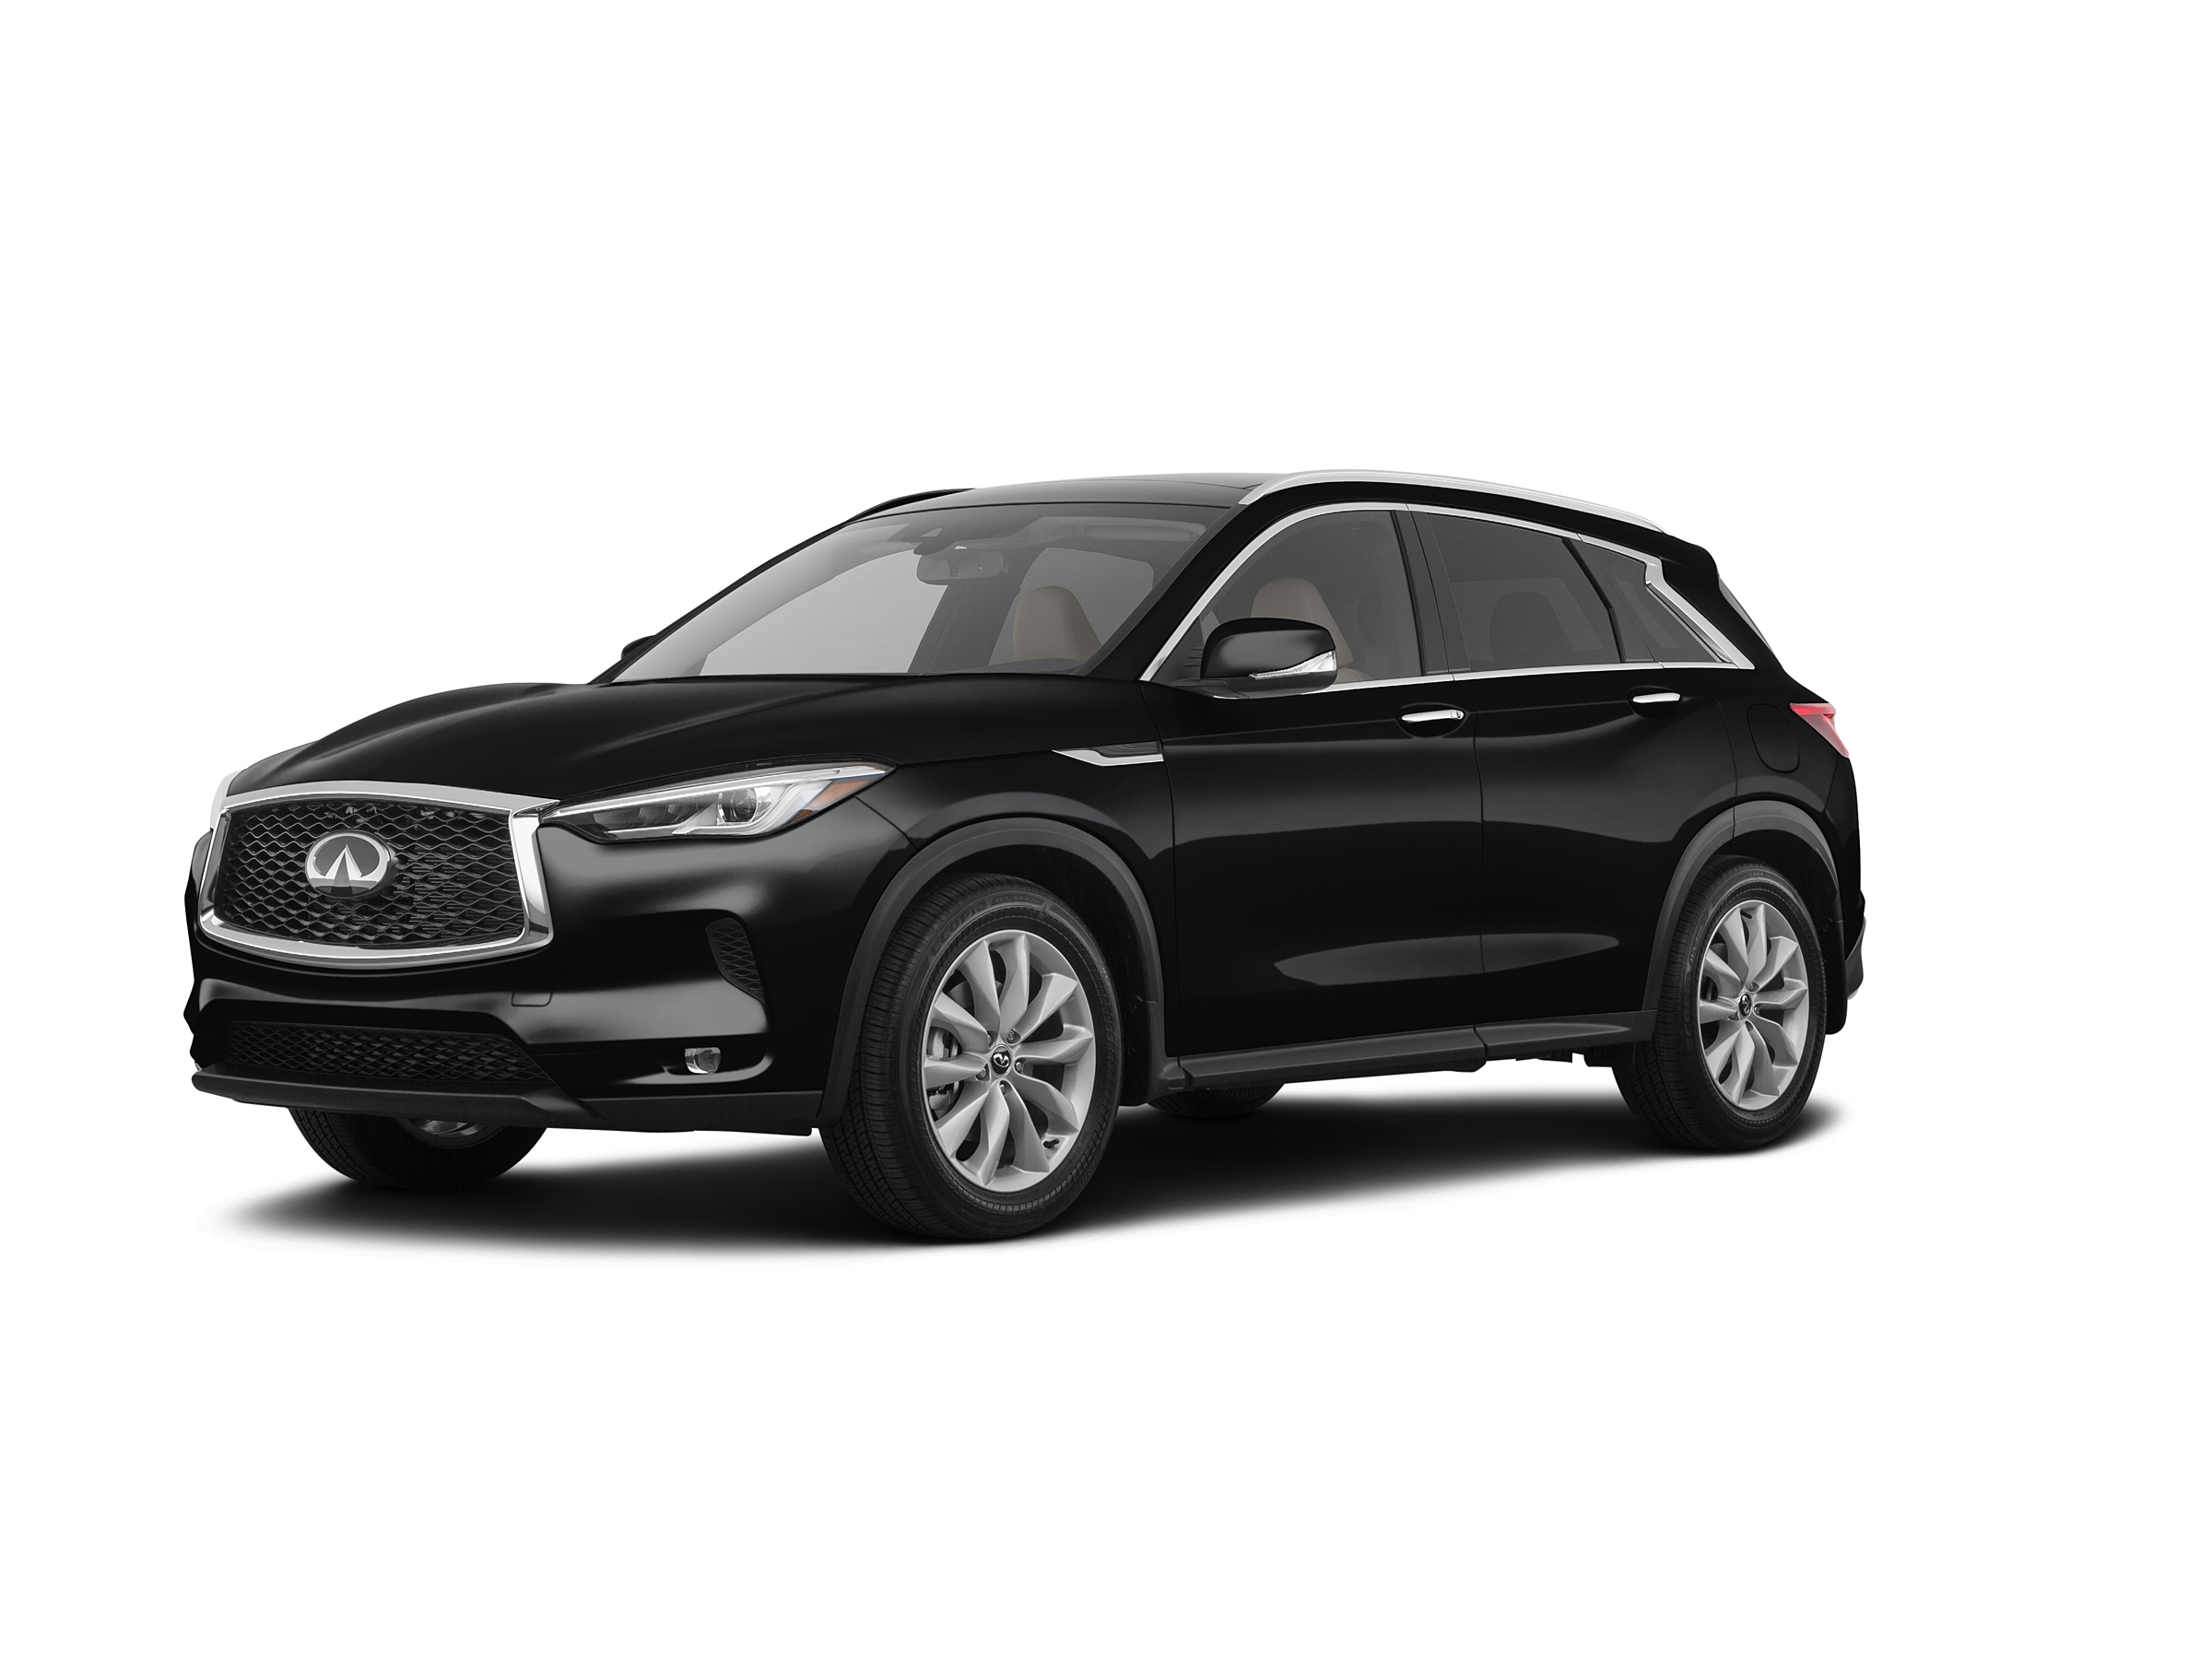 The 2019 INFINITI QX60 Sensory is the smart choice for drivers seeking excellent fuel efficiency, roominess, and technology.